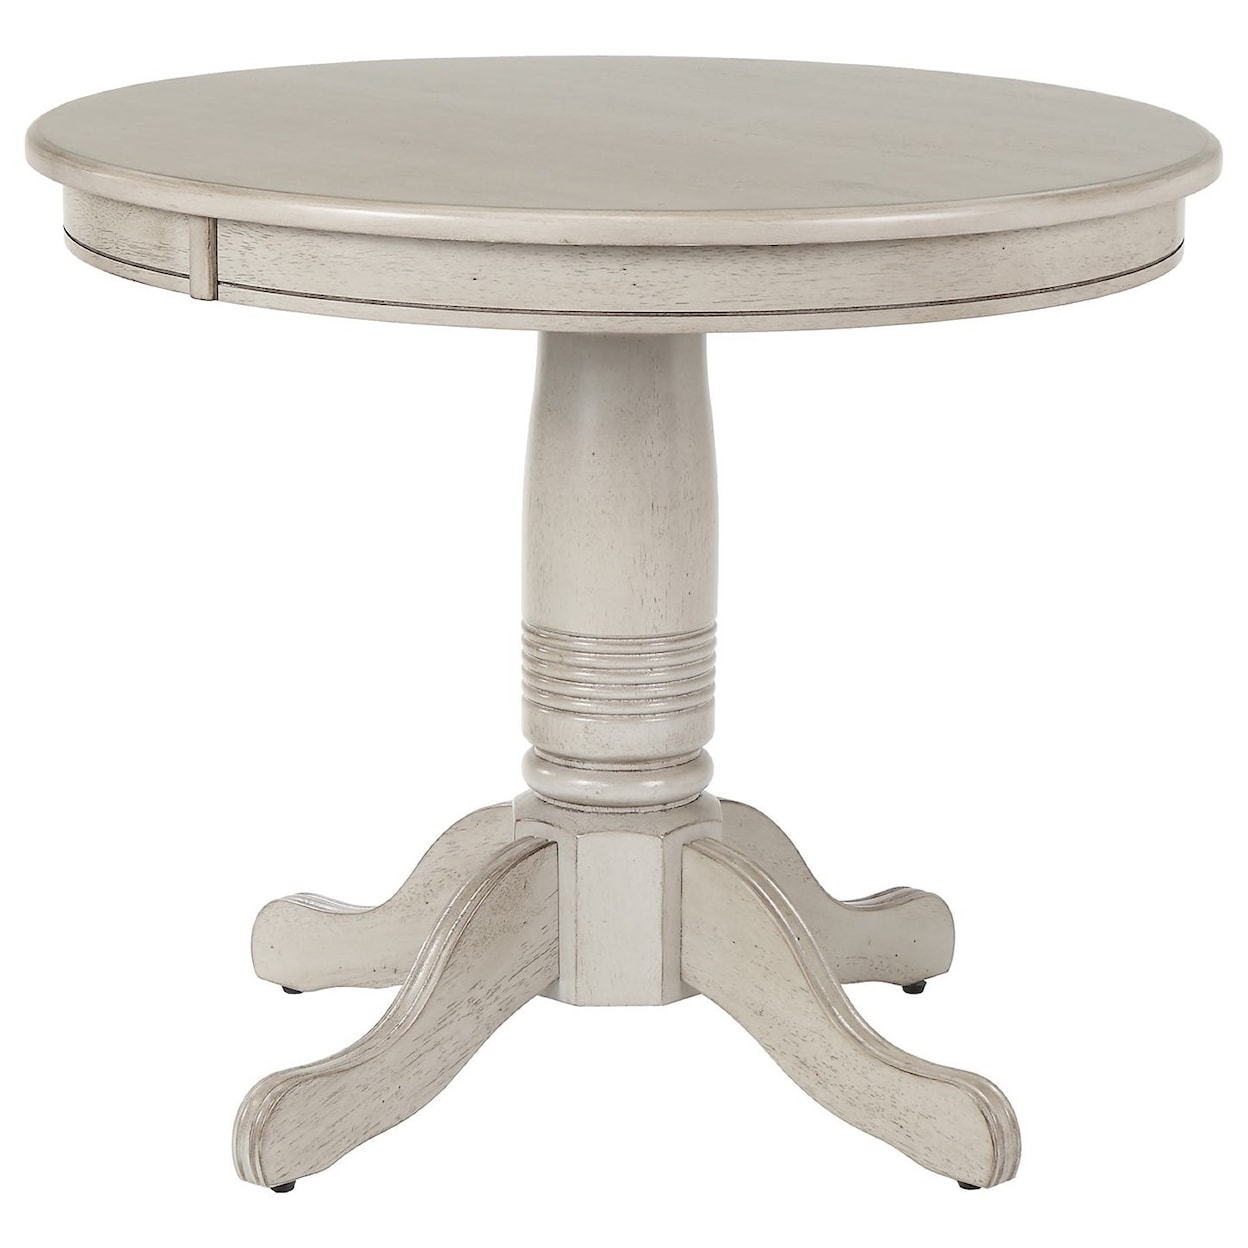 Winners Only Carmel 36" Round Pedestal Table